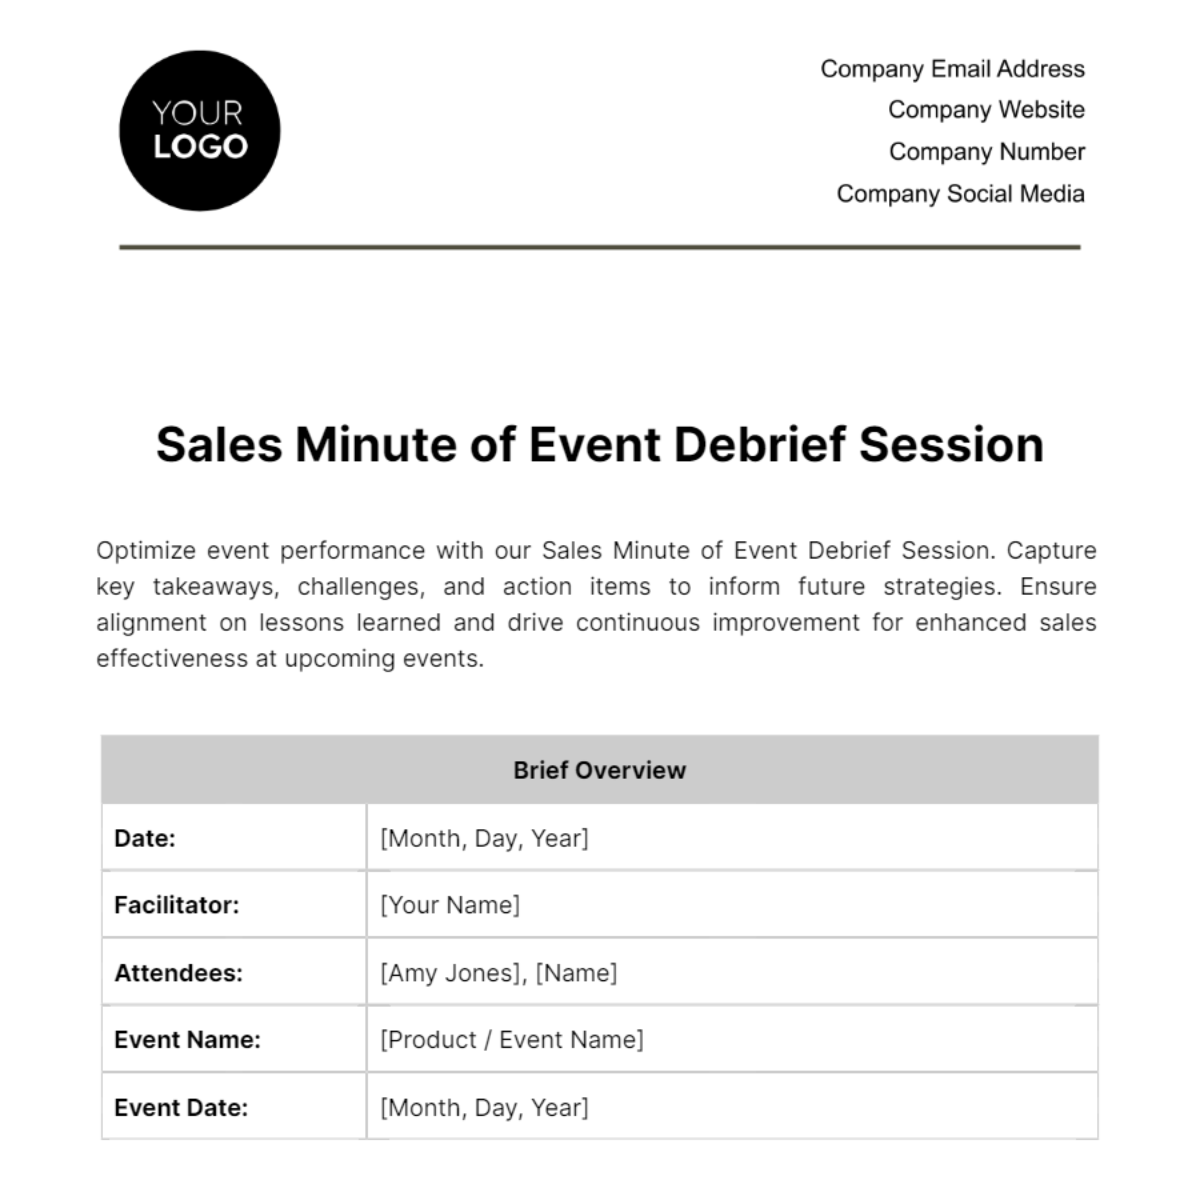 Free Sales Minute of Event Debrief Session Template